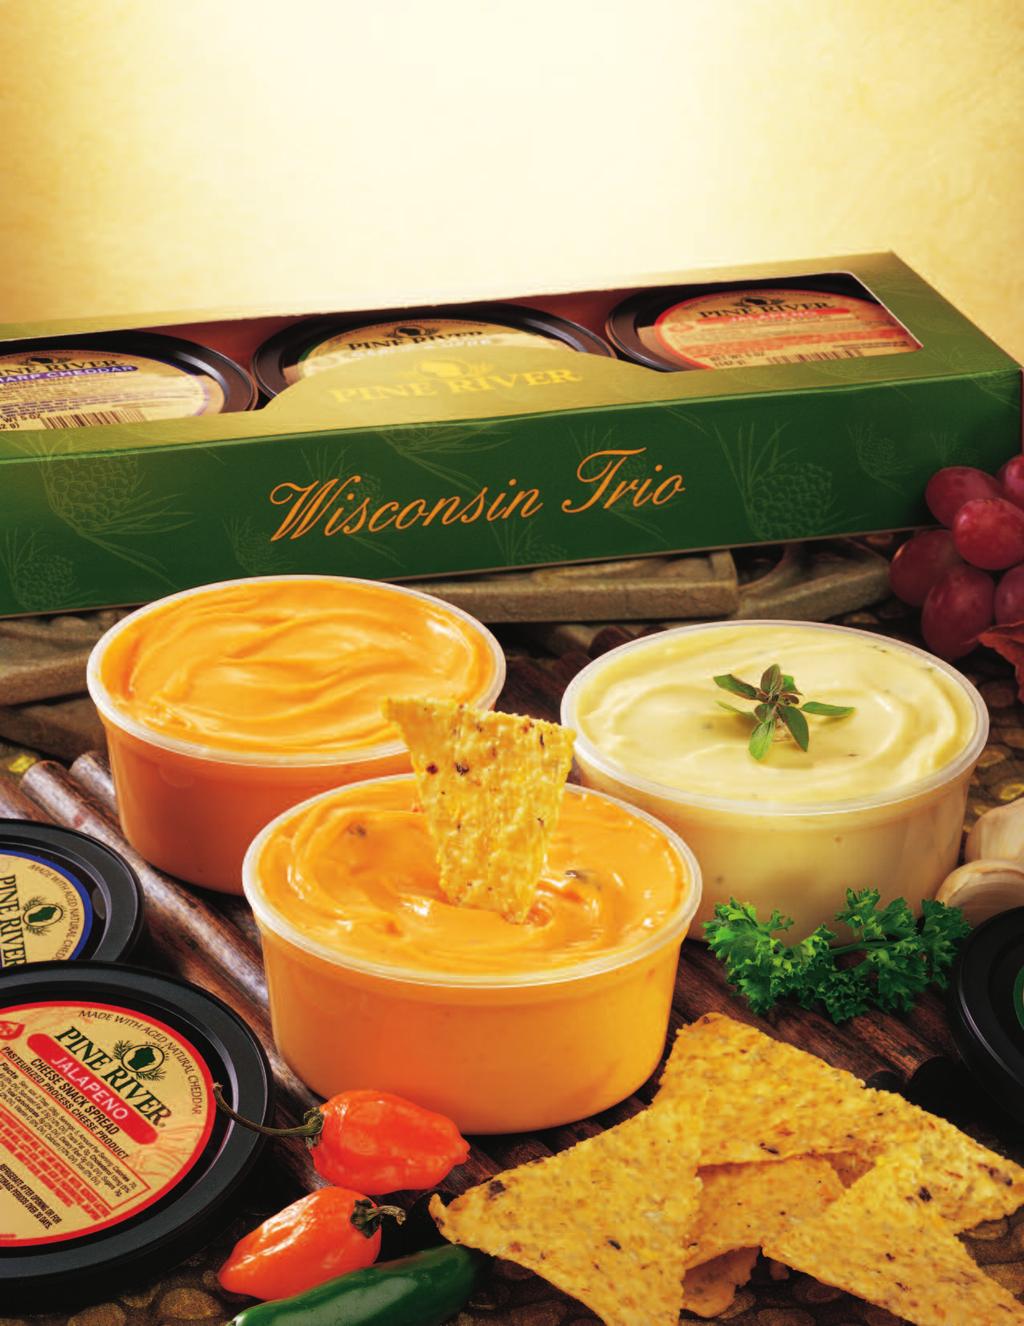 This buttery and mellow Cheddar cheese spread is our most popular flavor. (12 oz.) $13 SMOKEY BACON SNACK SPREAD P820. Golden Cheddar cheese accented with hickory-smoked bacon flavor. (12 oz.) $13 JALAPENO SNACK SPREAD P860.